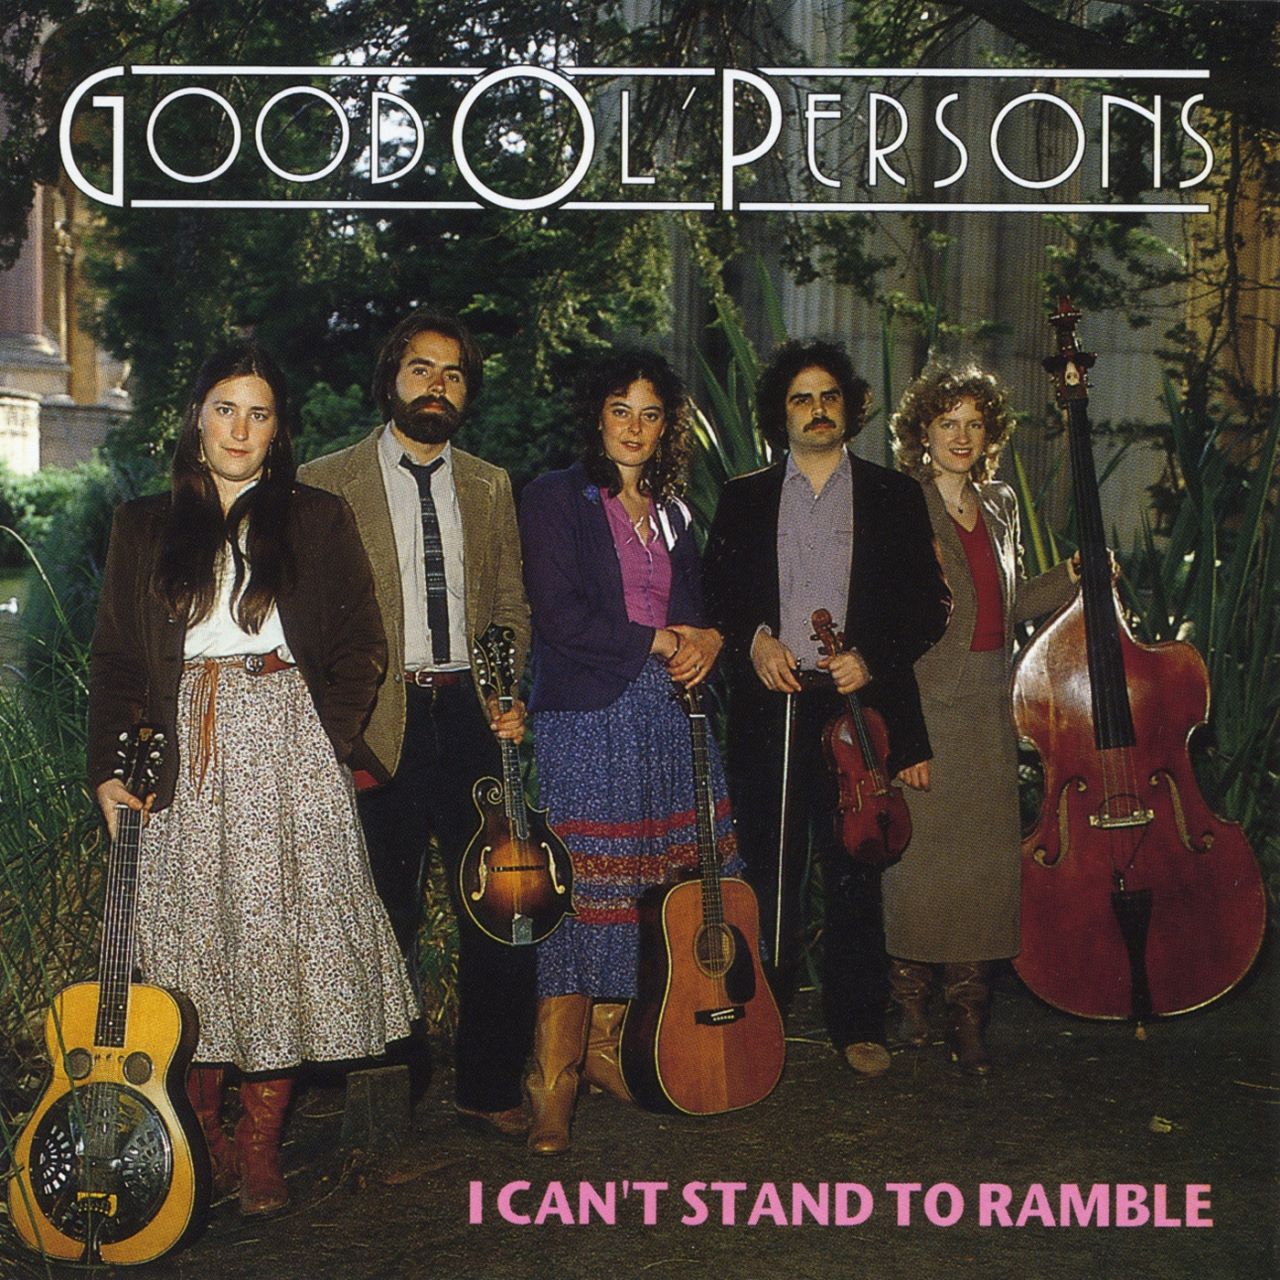 Good Ol' Persons - I Can't Stand To Ramble cover album